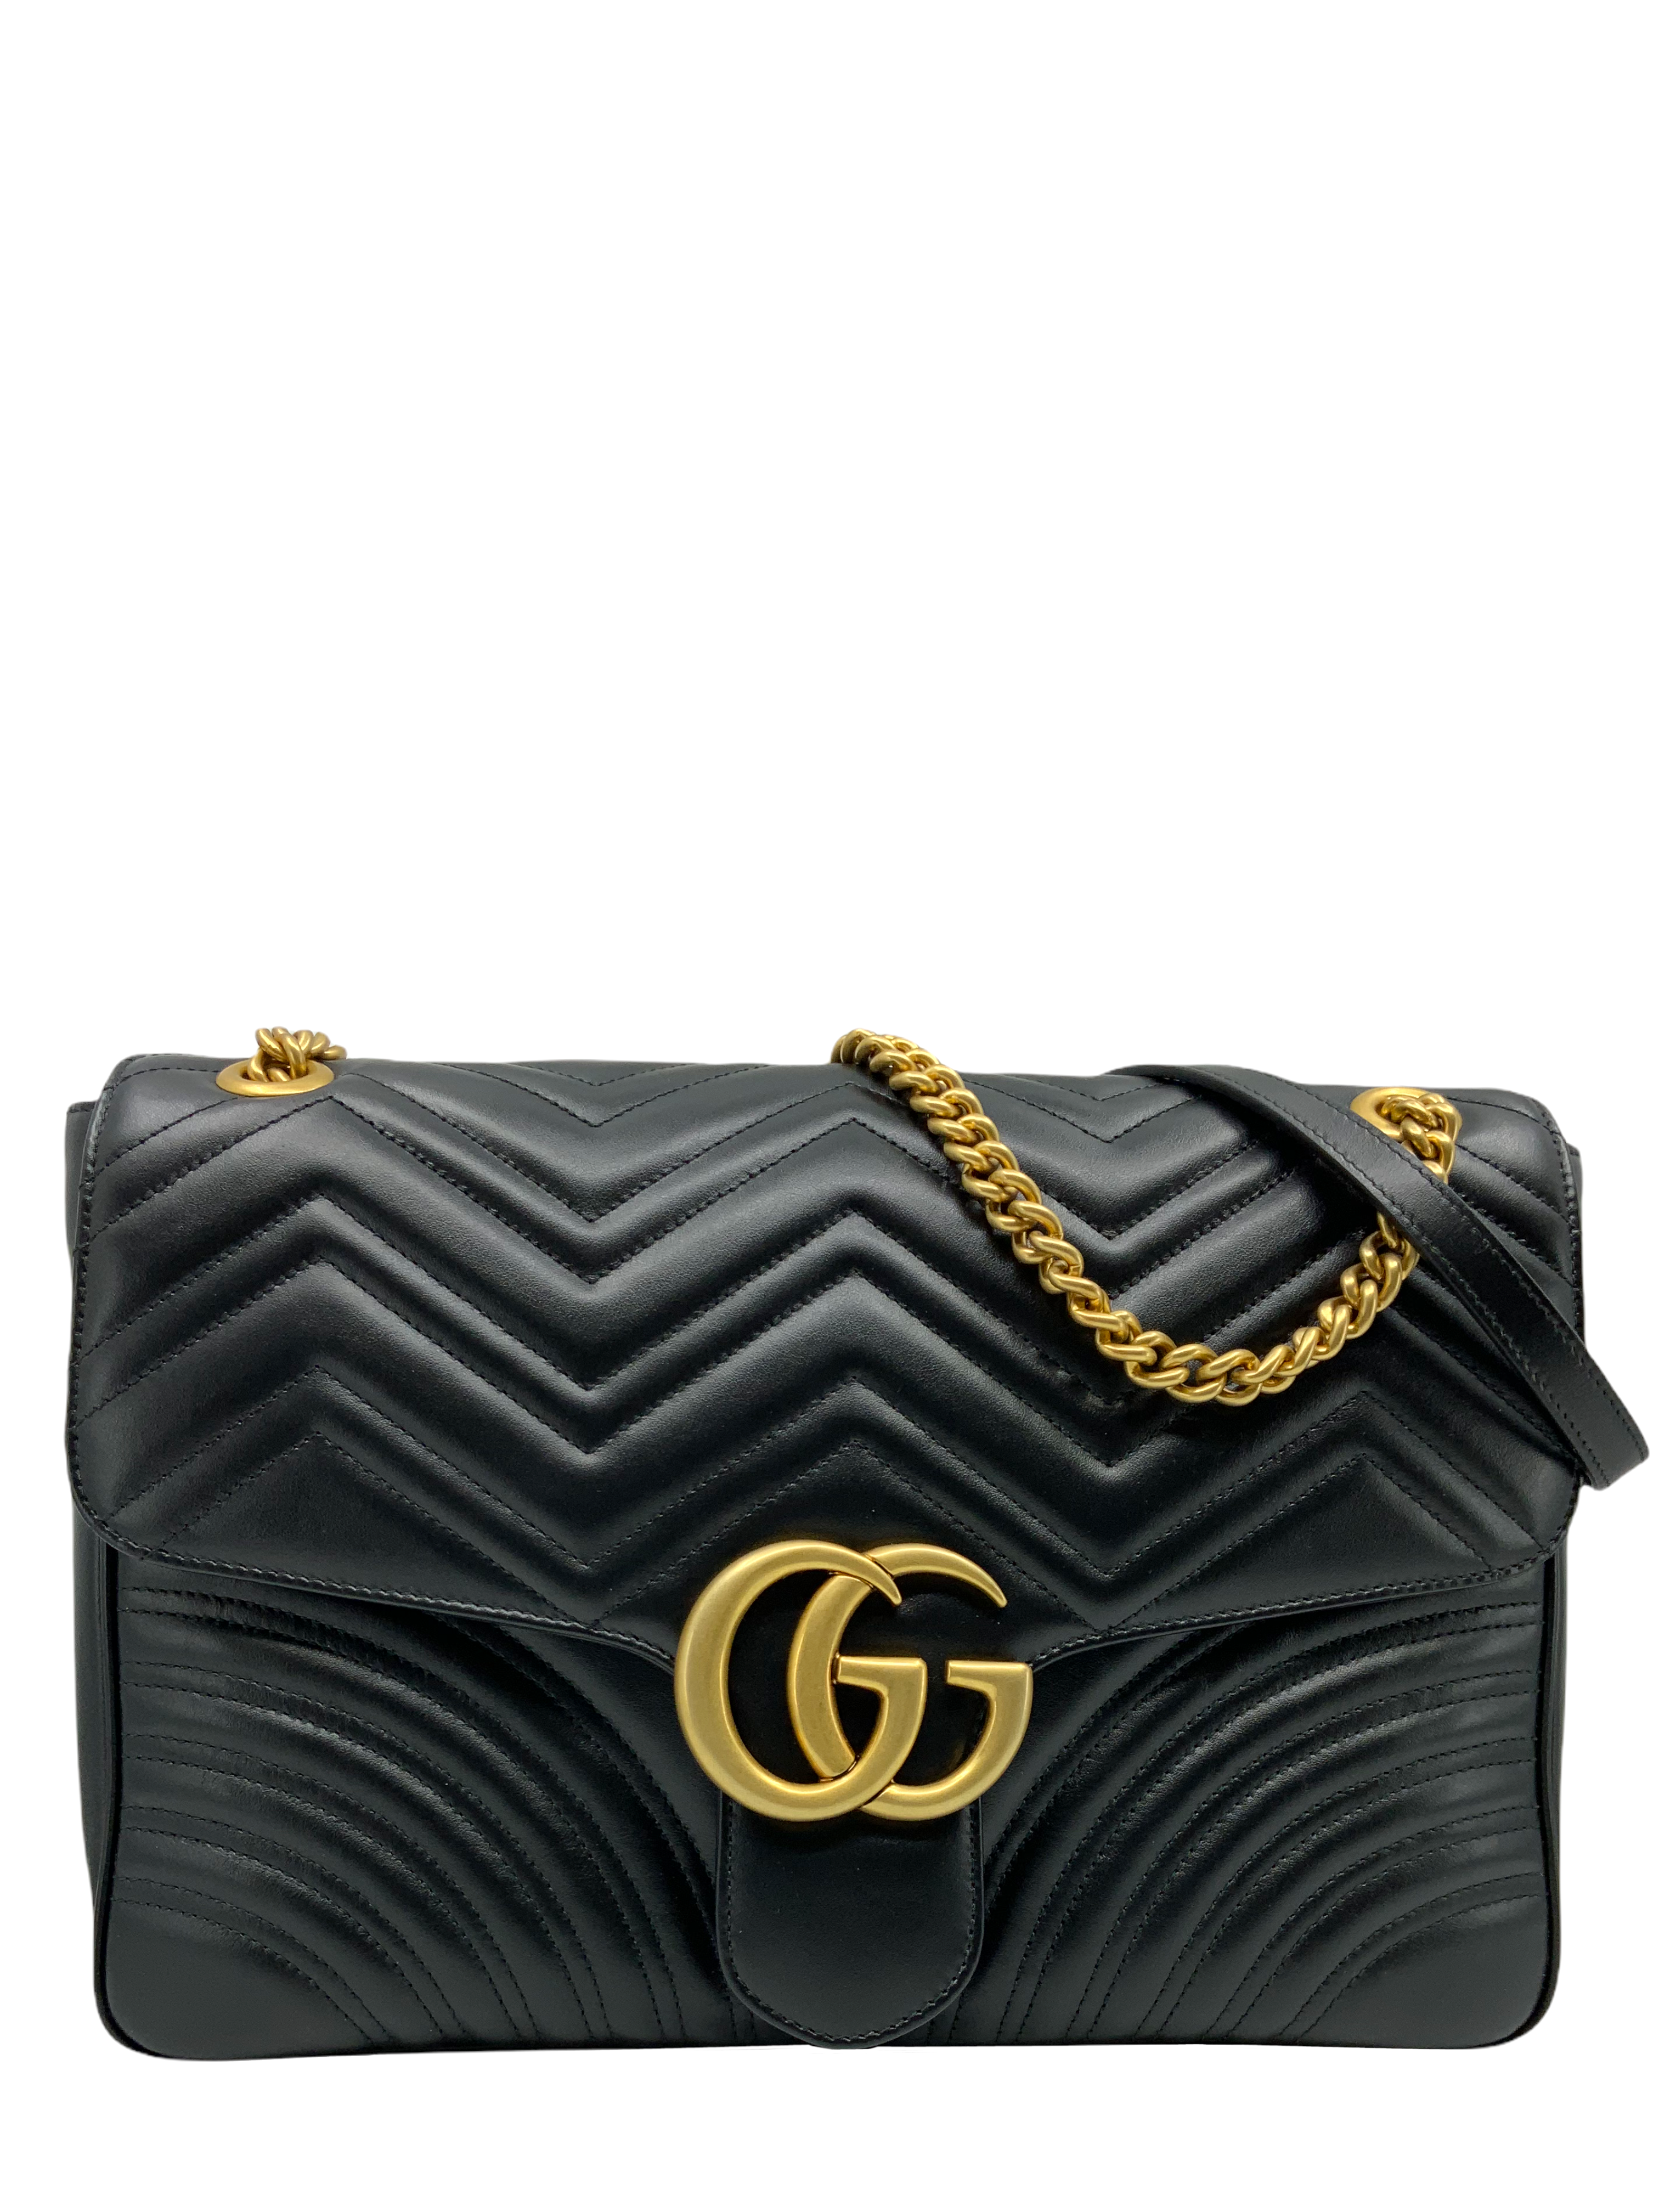 Gucci Shoulder Bag Gg Marmont Small Size In Matelassè Leather Worked With  Chevron Pattern And Heart On The Back in Black